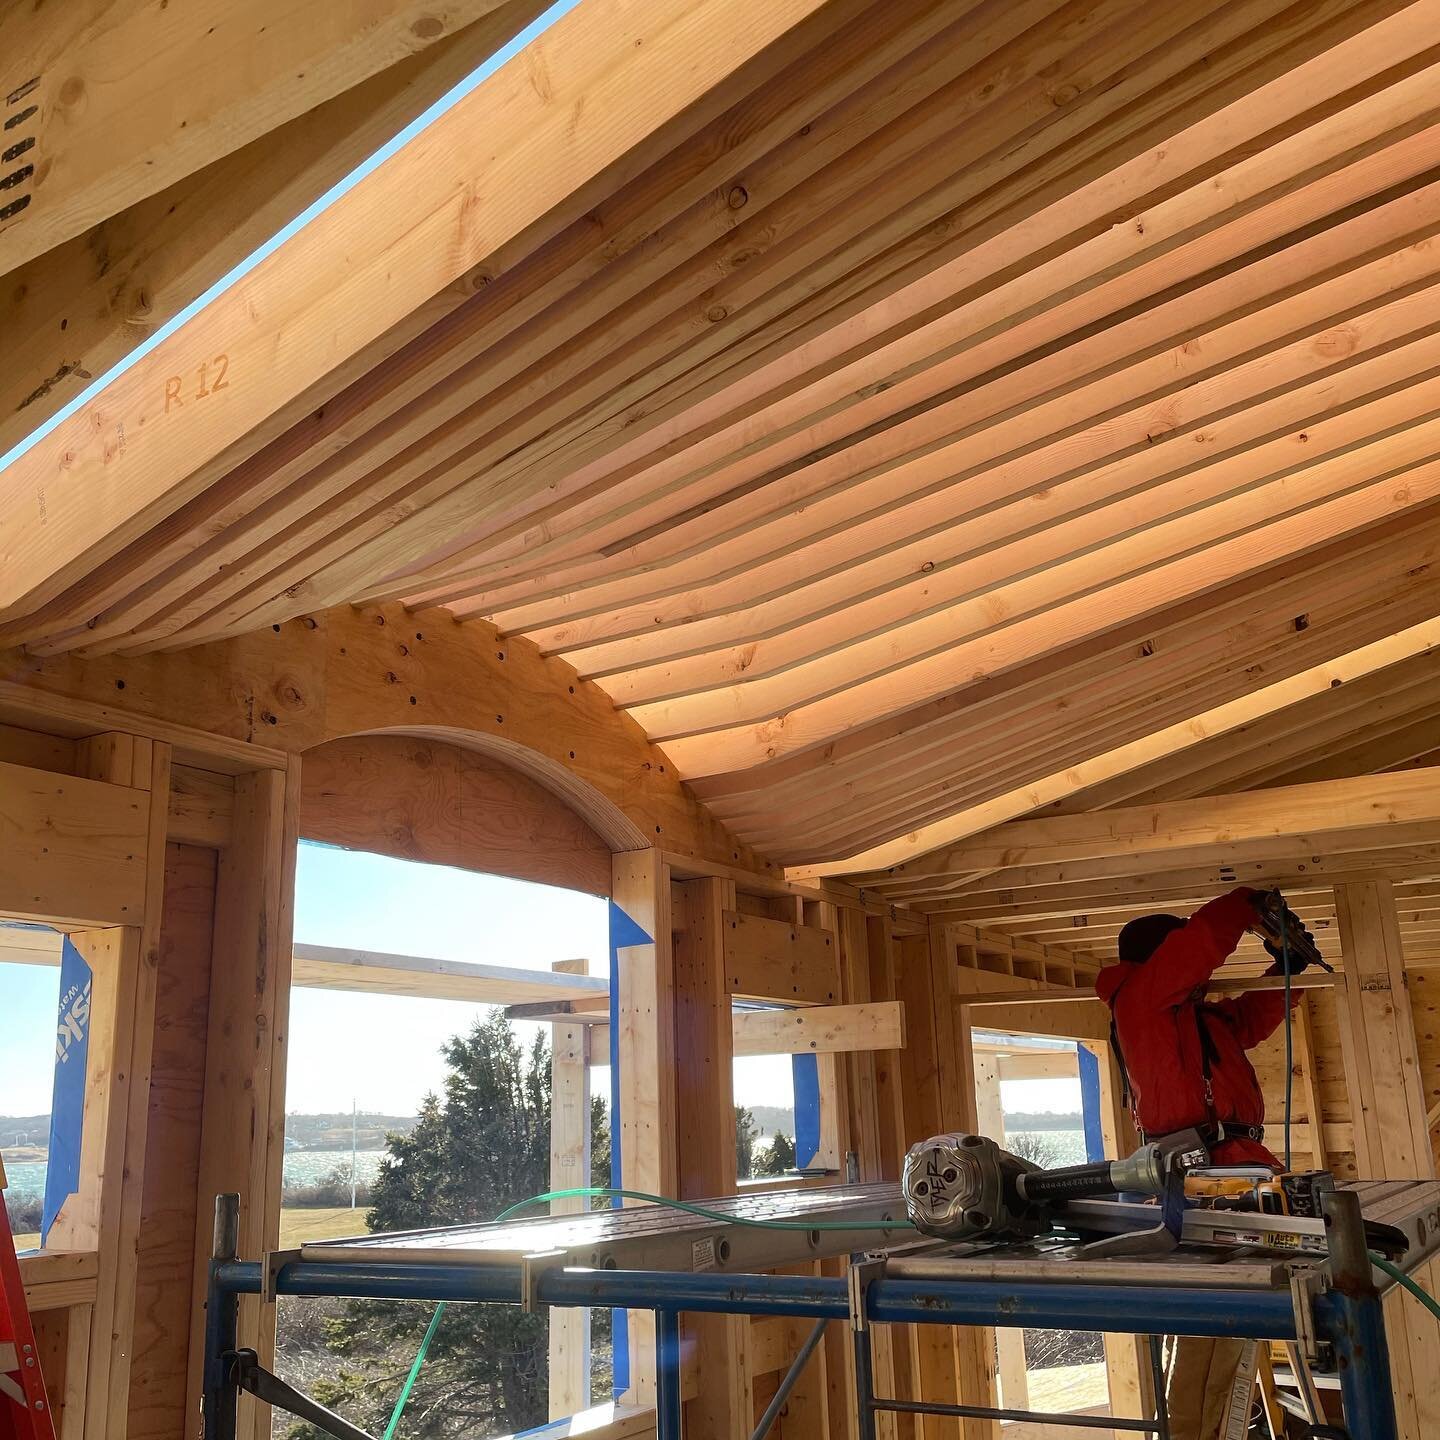 A follow-up to the barrel dormer framing package we provided. Up in no time at all on a windy, cold day! #bringonspring